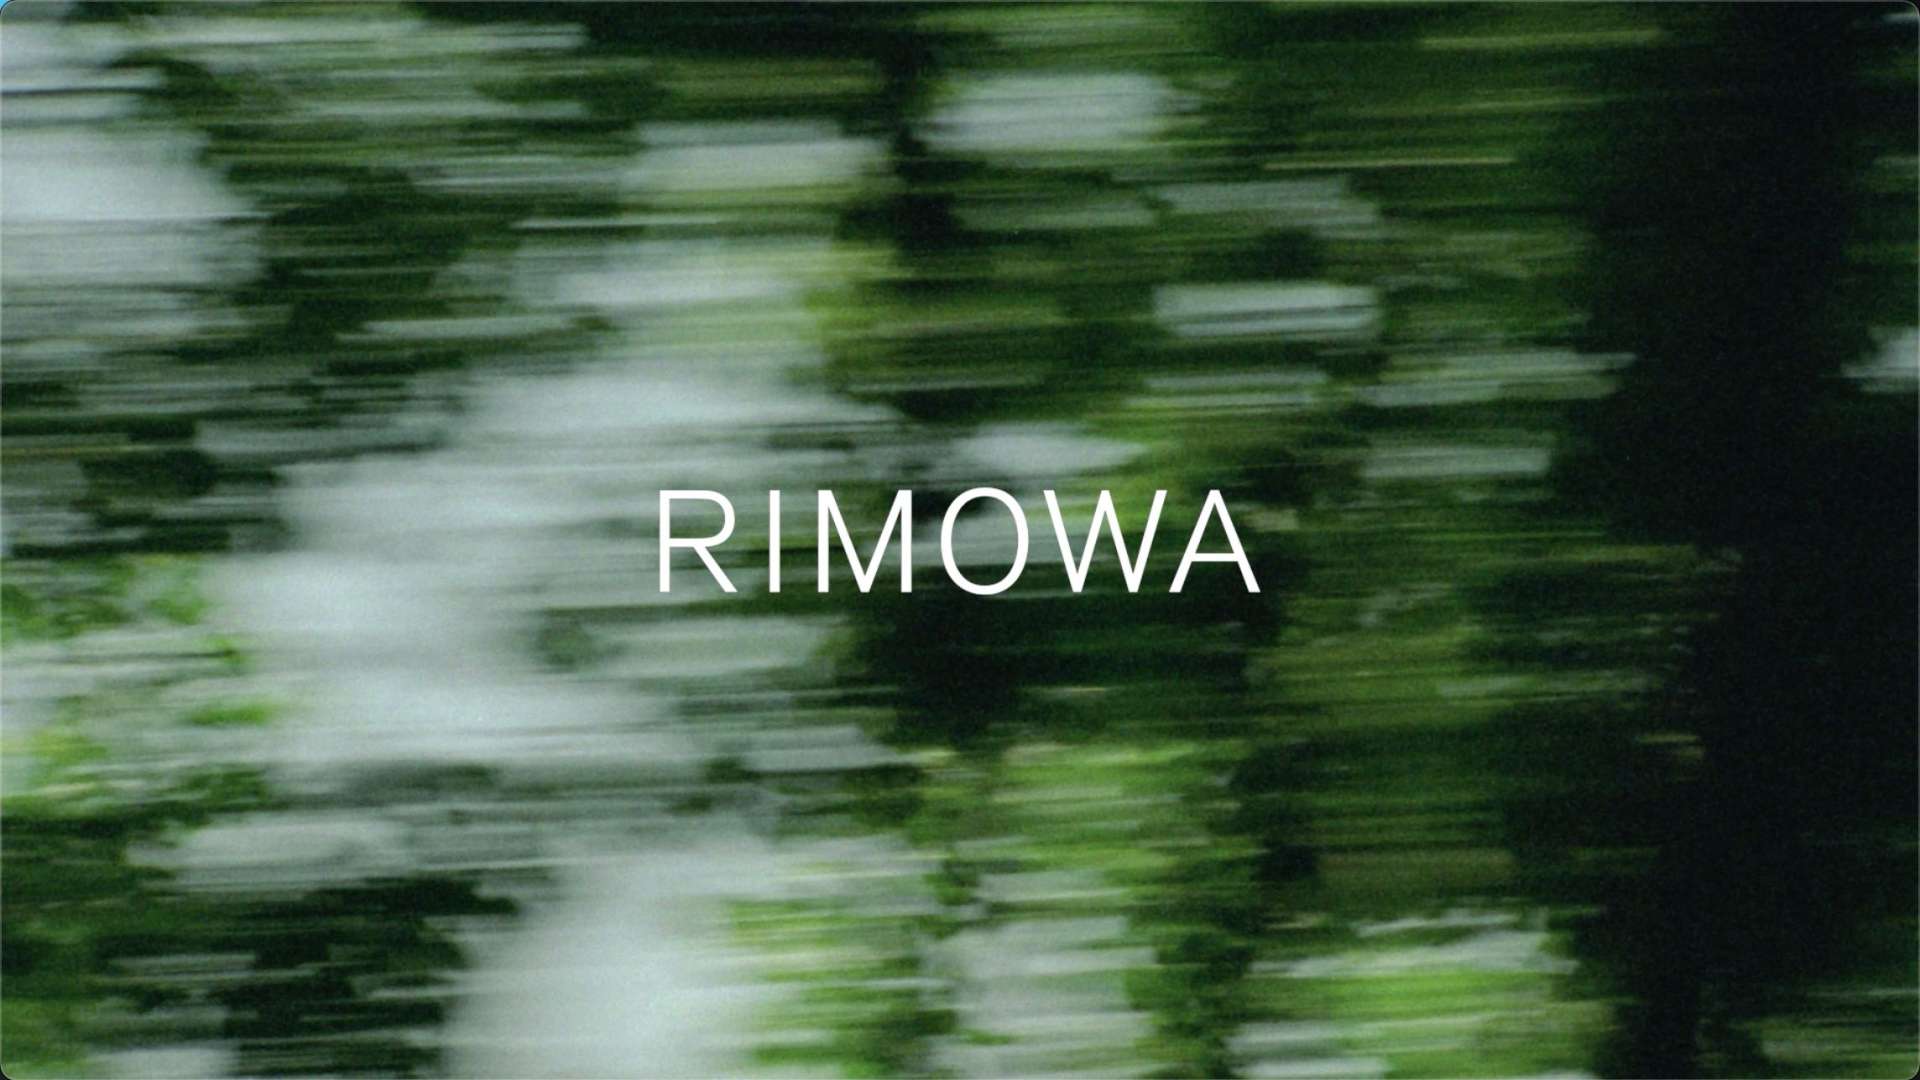 RIMOWA | FATHER'S DAY